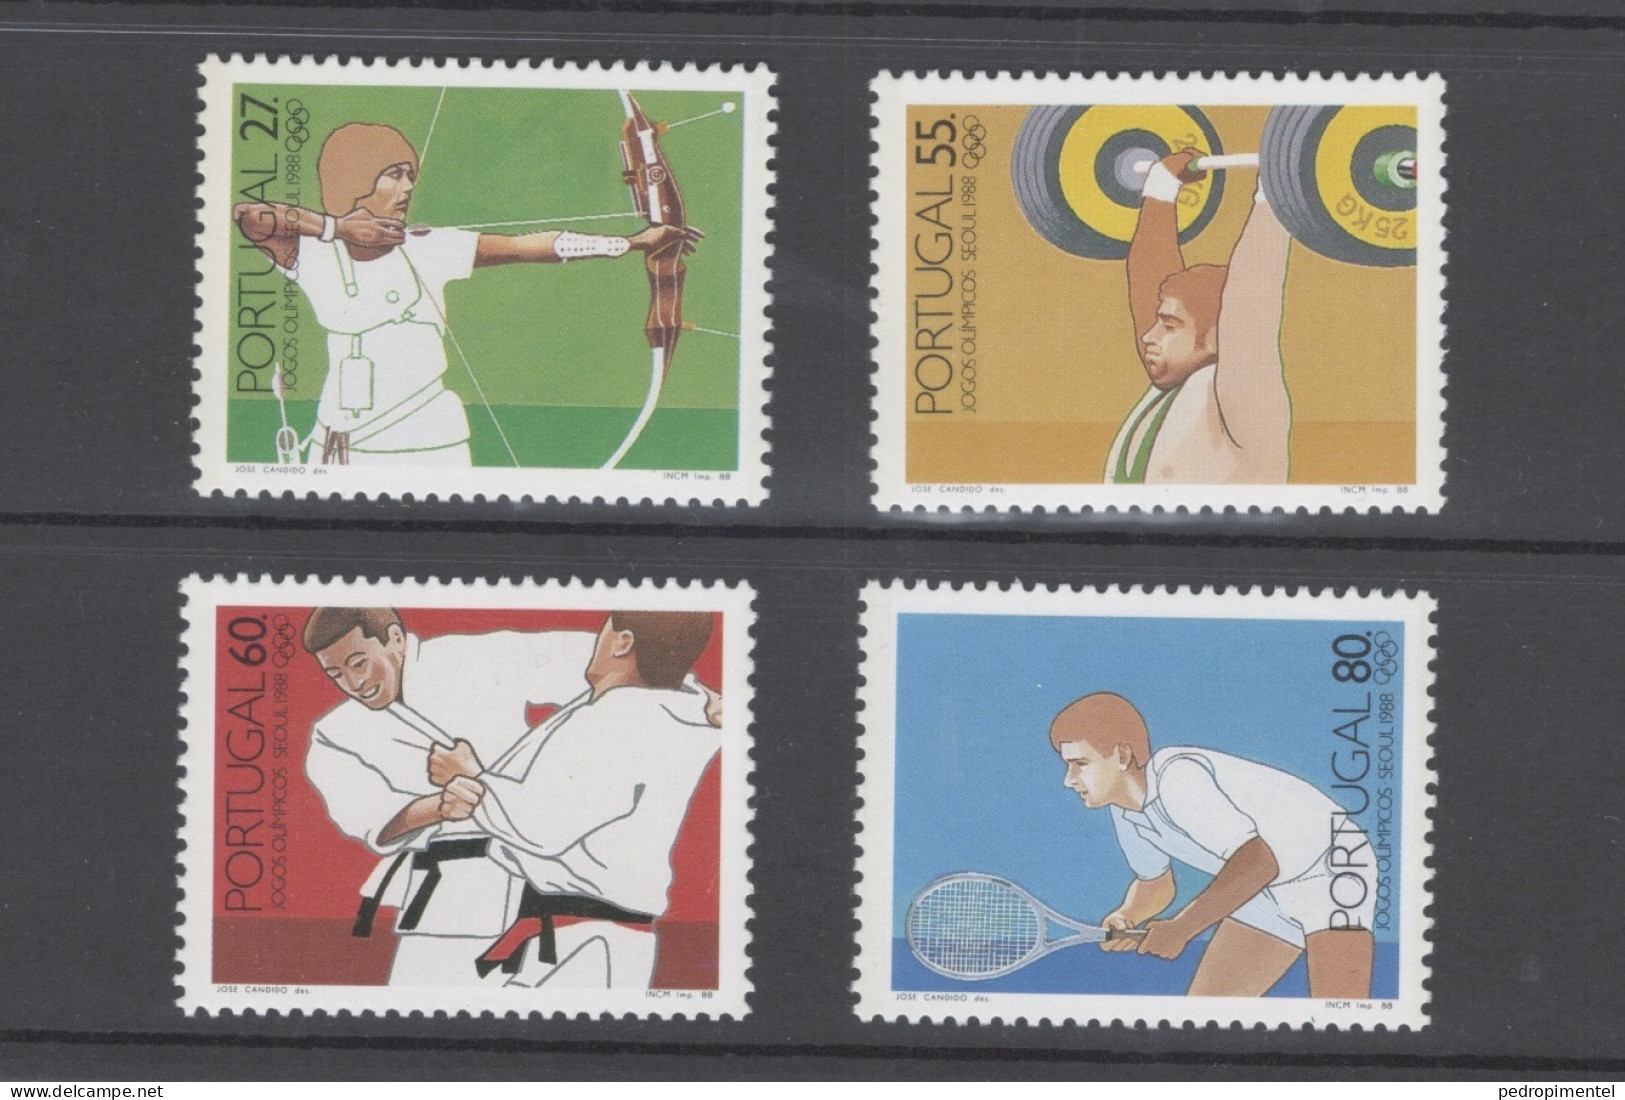 Portugal Madeira 1988 "Seoul Olympic Games" Condition MNH OG Mundifil #1854-1857 - Unused Stamps